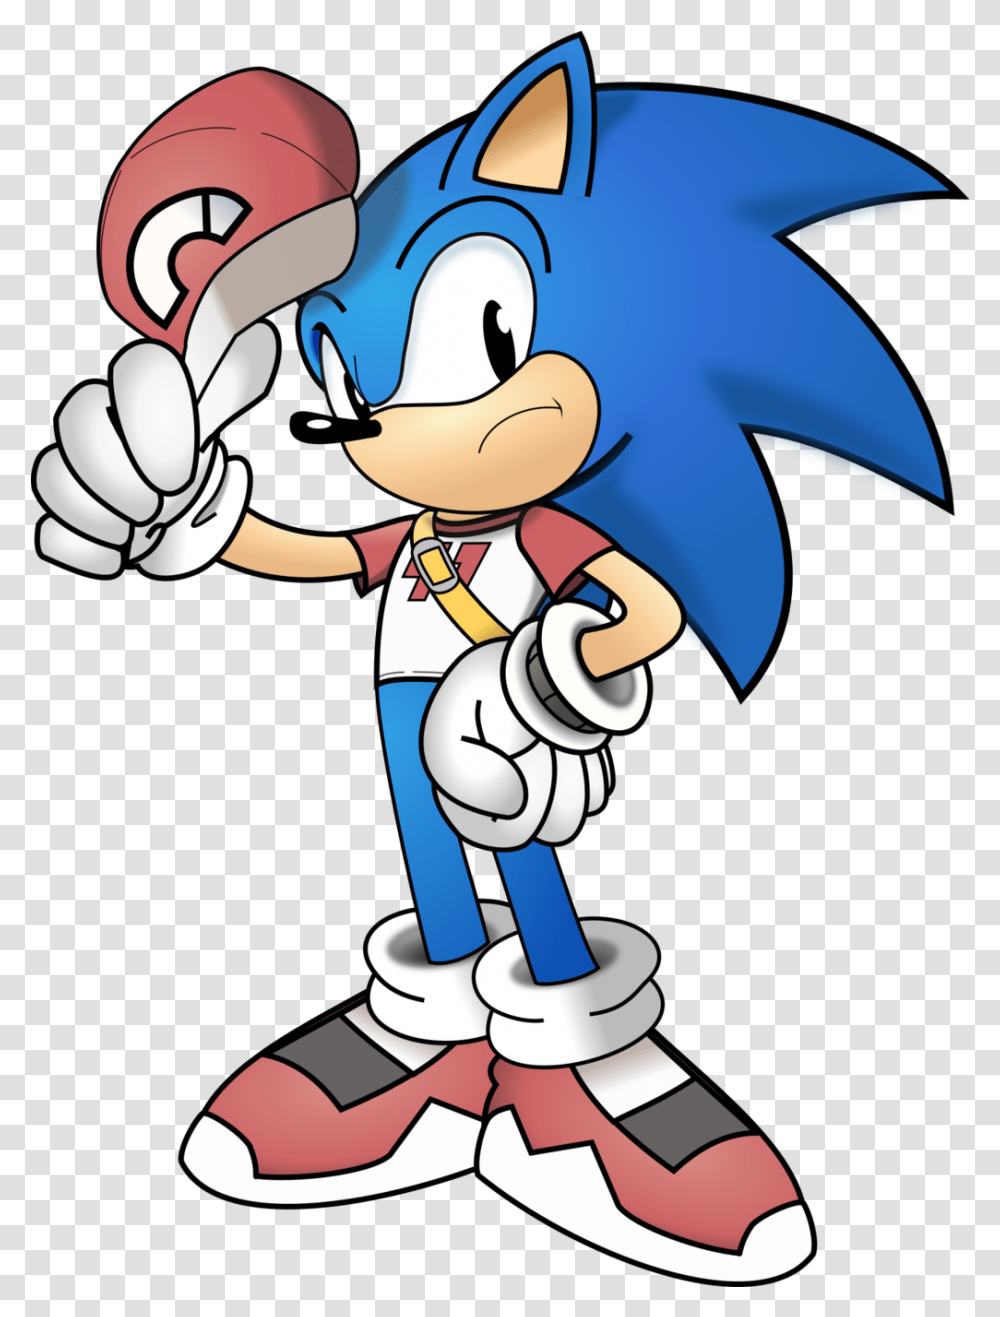 Sonic The Hedgehog Clipart Red Sonic The Hedgehog Pokemon Sonic The Hedgehog Older, Hand, Performer, Book, Graphics Transparent Png